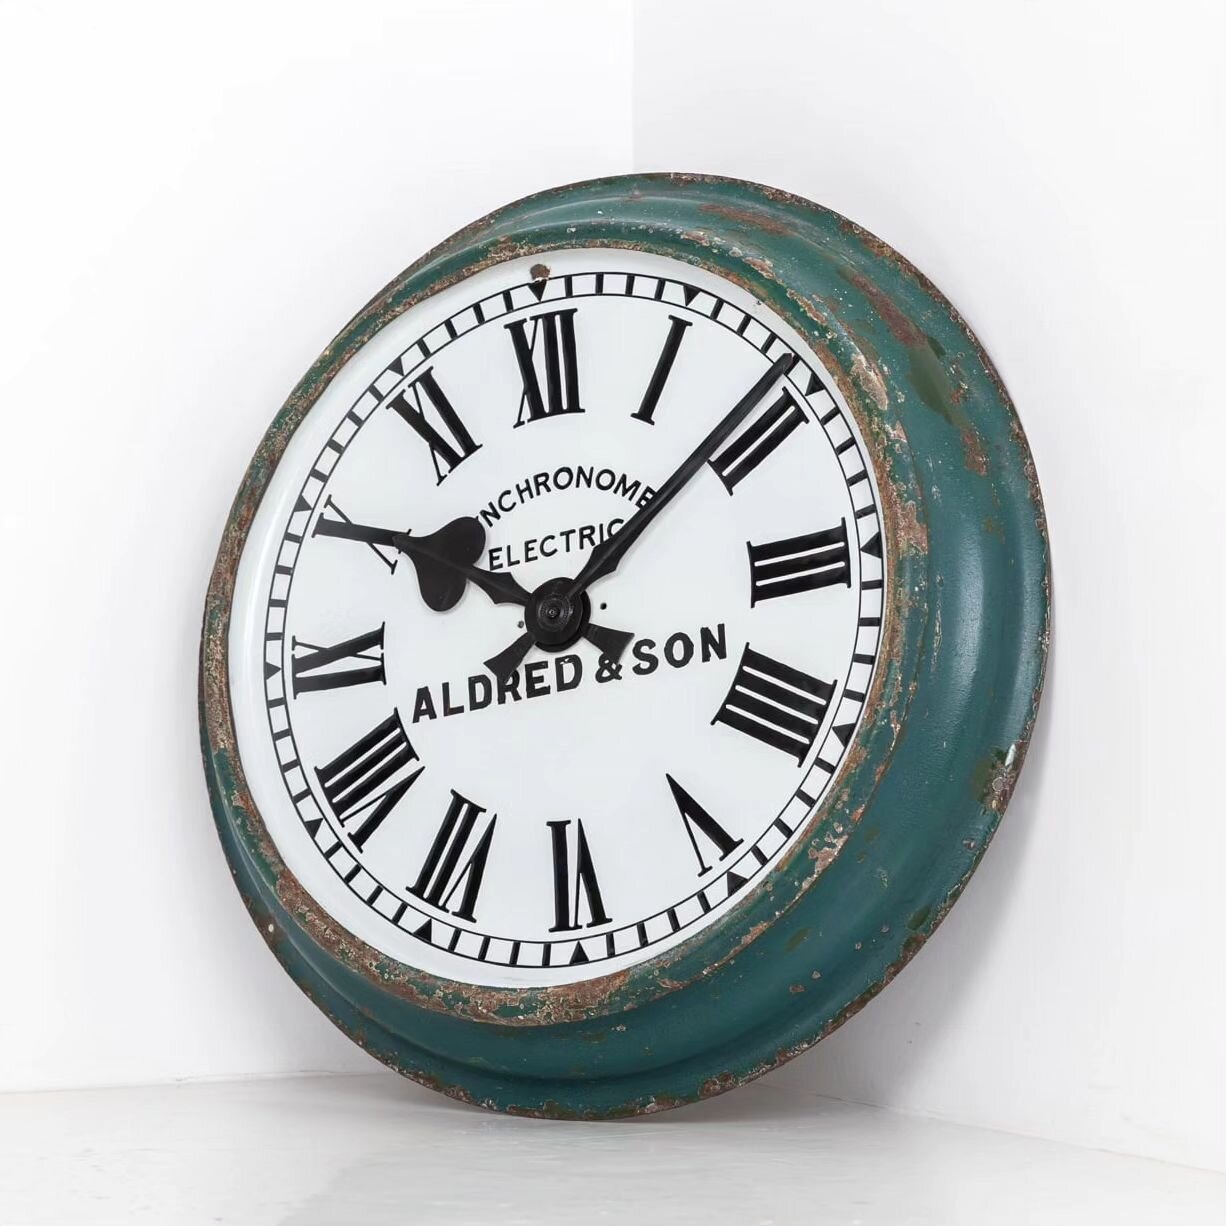 Recently sold, an overpainted enamel wall clock by Synchronome. The multiple layers of paint make for an incredible variety of colour. The hand painted company name is also a nice addition. 

#antiquesworkshop #vintageindustrial #antique #vintage #mi